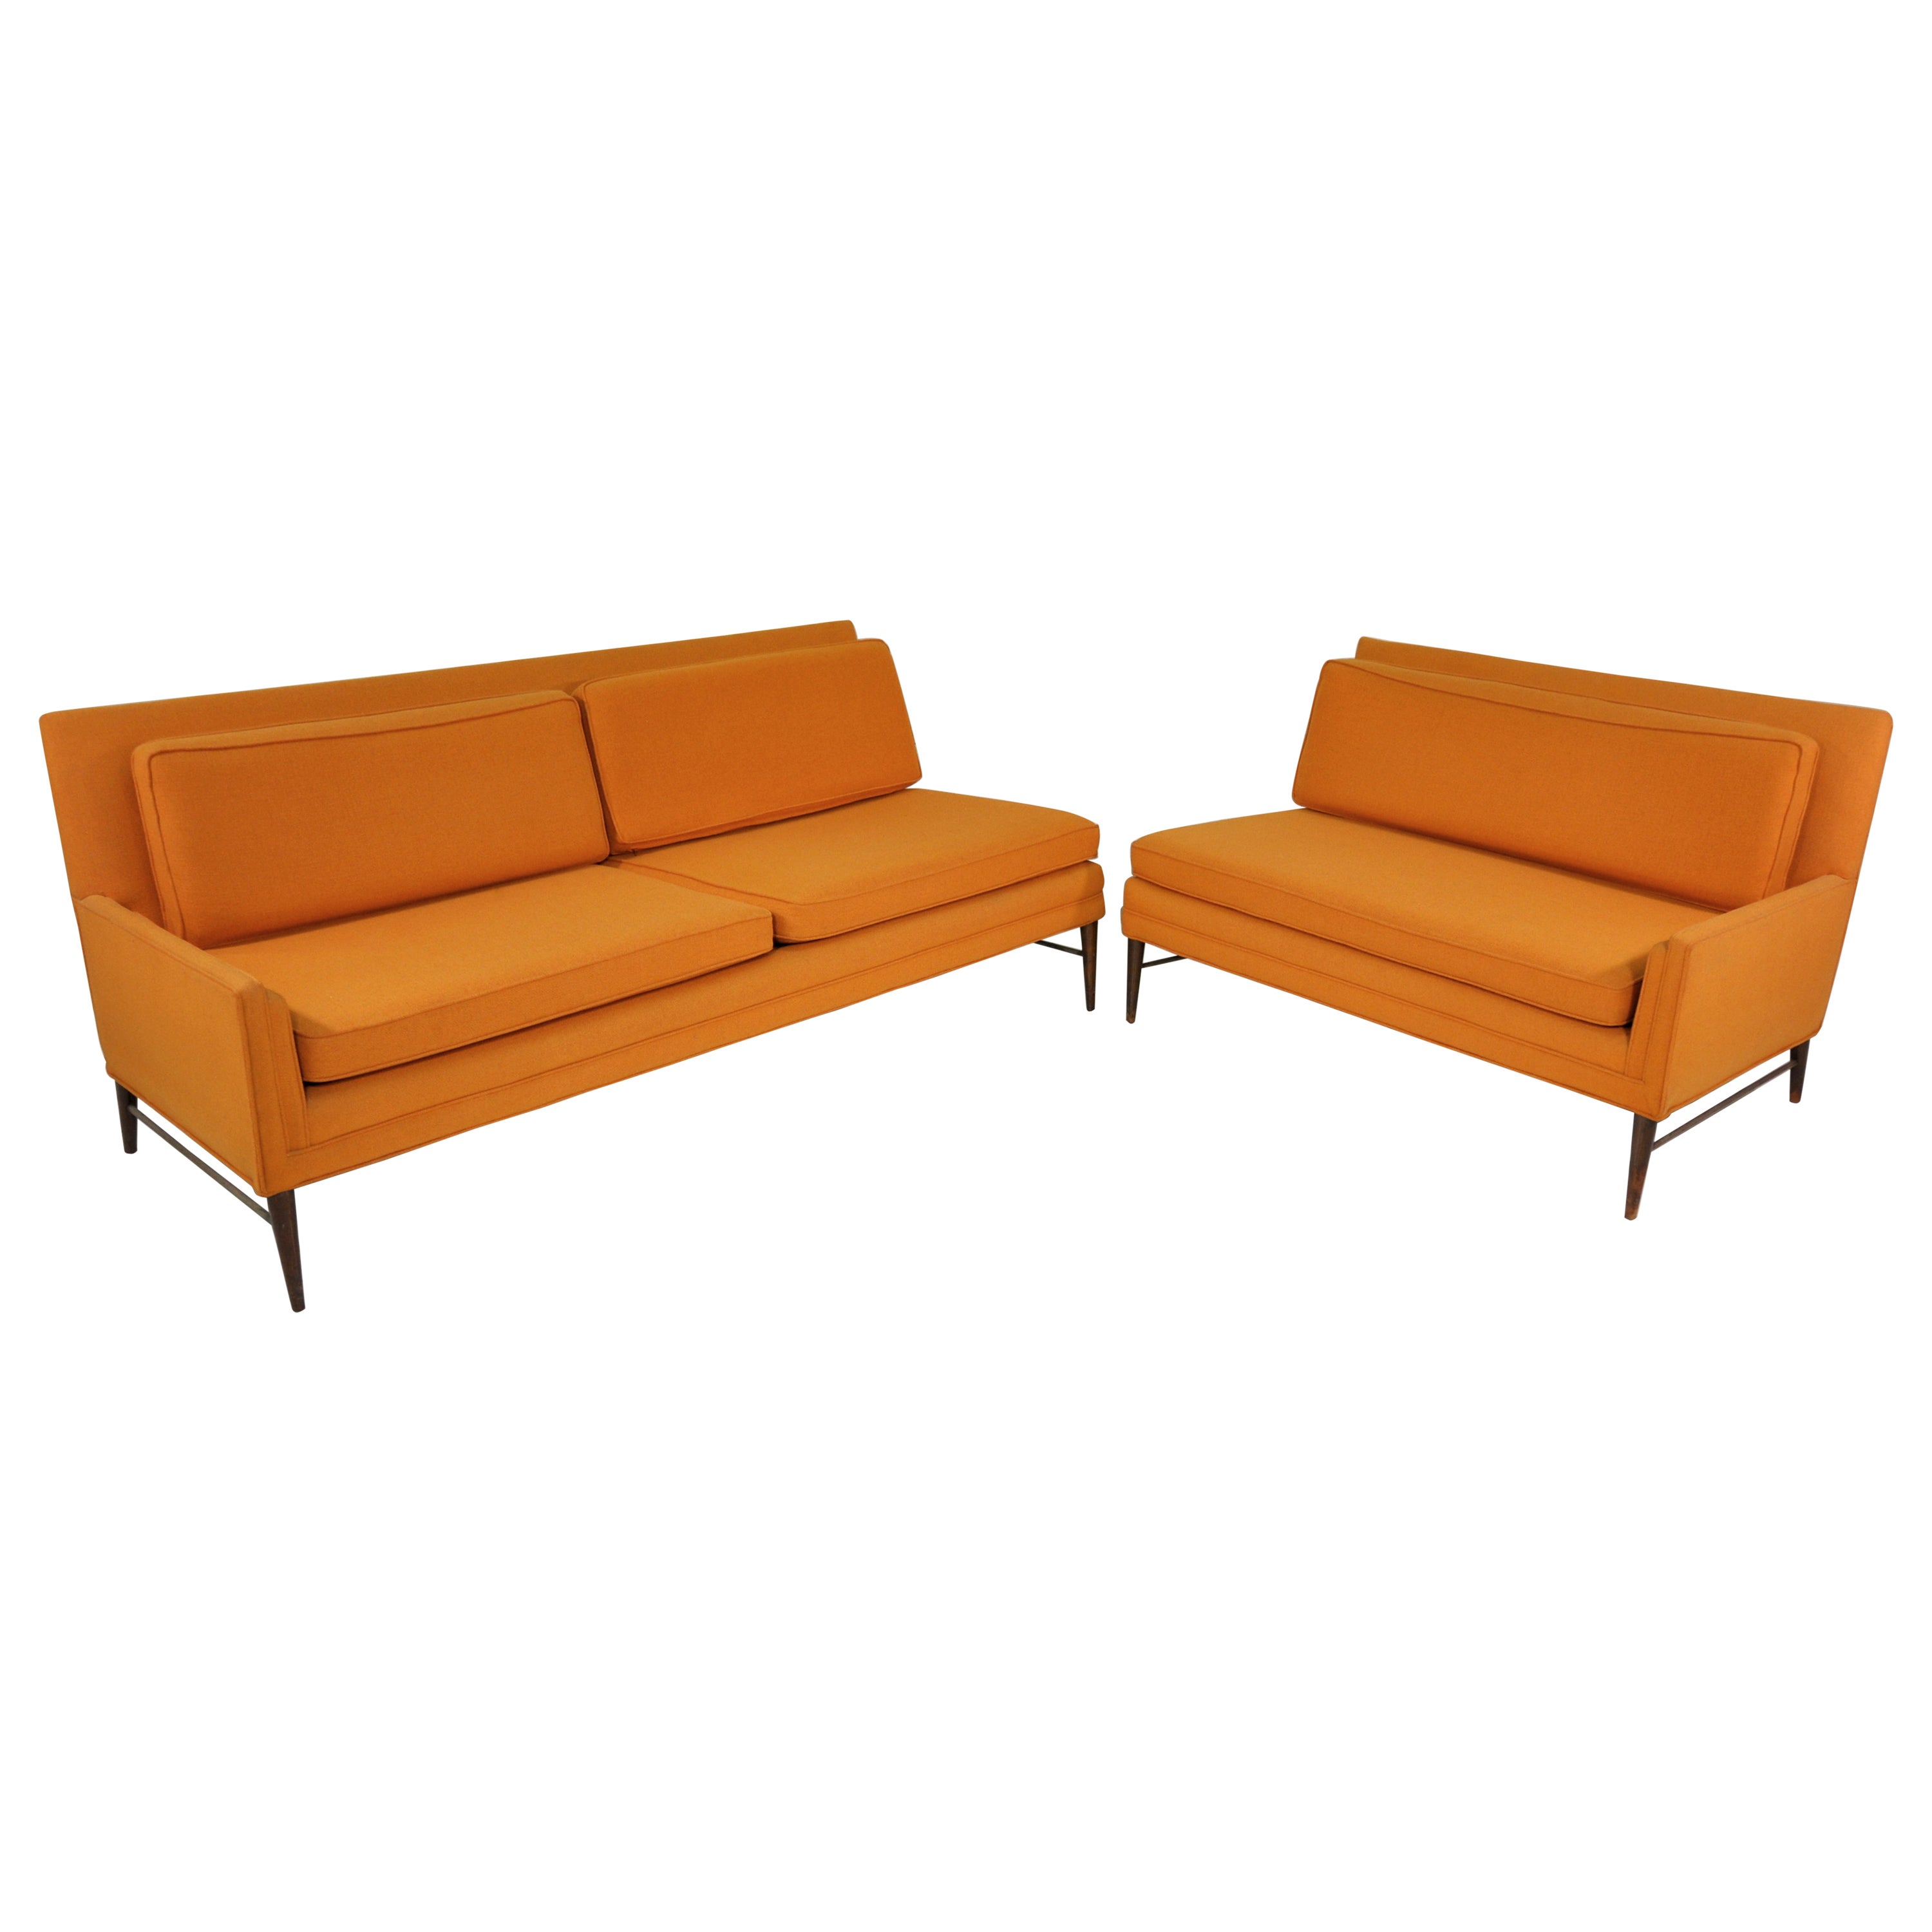 All original Paul McCobb walnut and brass two piece sectional sofa from the designer's coveted Directional collection. The rare Mid-Century Modern set features: a model 5006-L left arm sofa; a model 5004-R right arm loveseat; set-in arm detail;